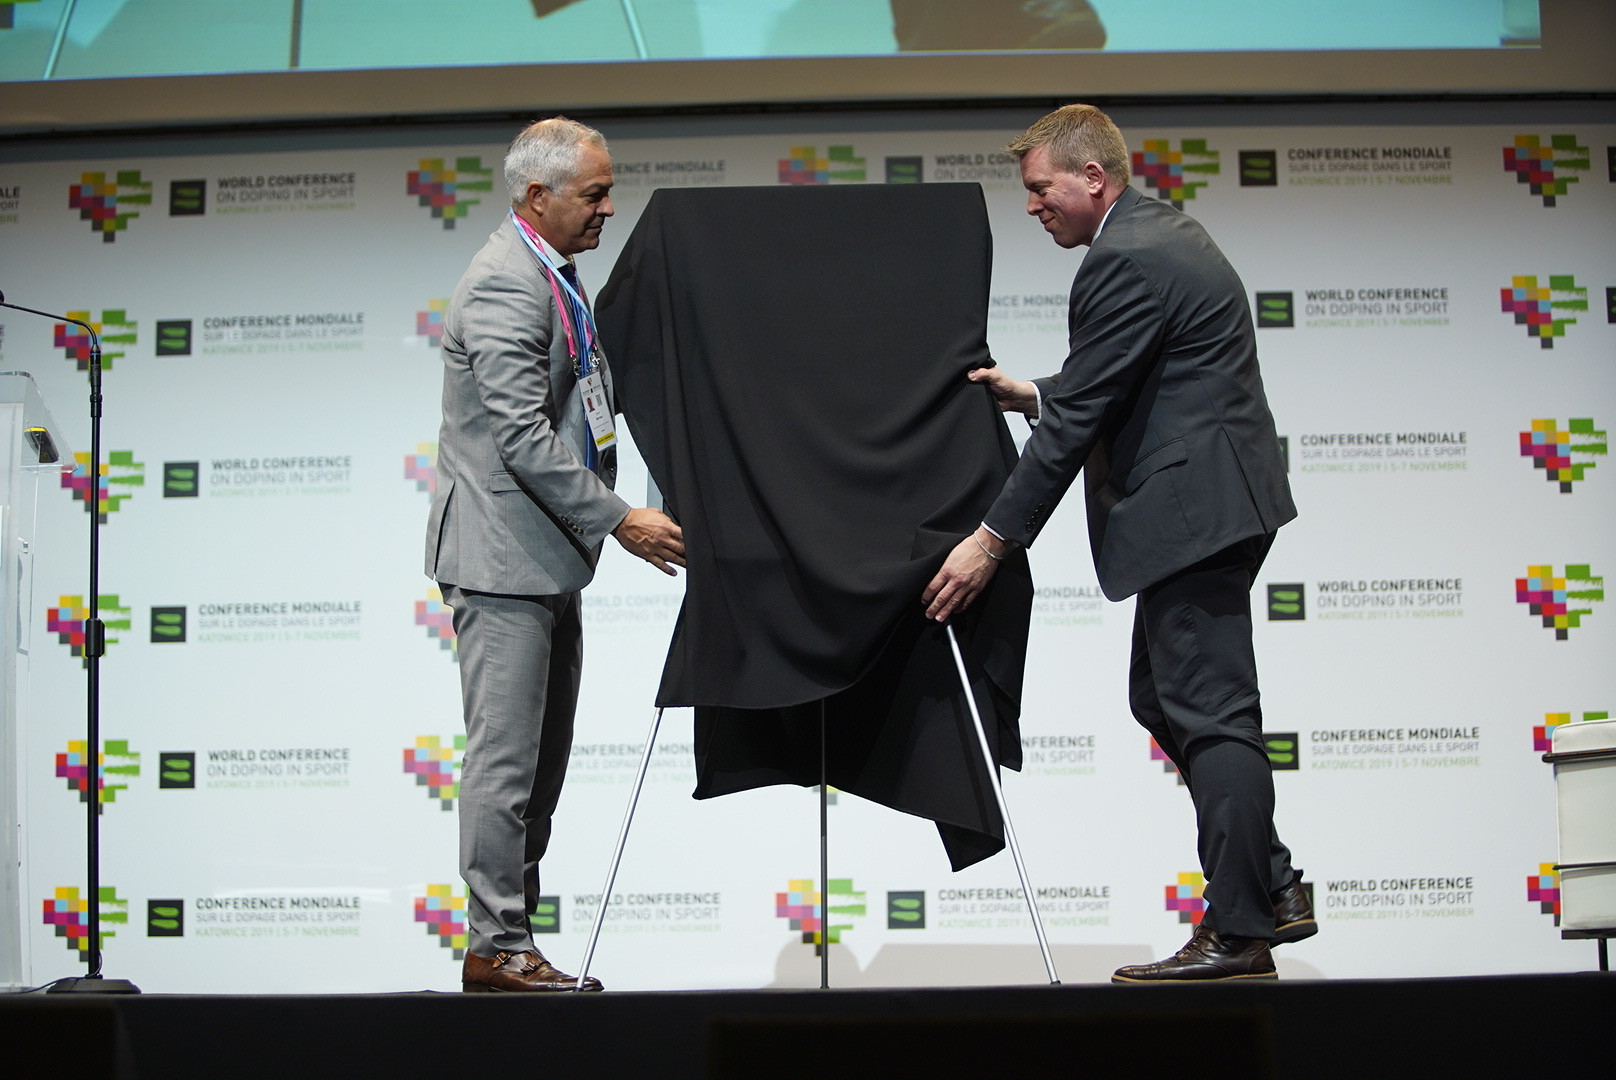 The picture was unveiled on stage during the World Conference on Doping in Sport ©WADA